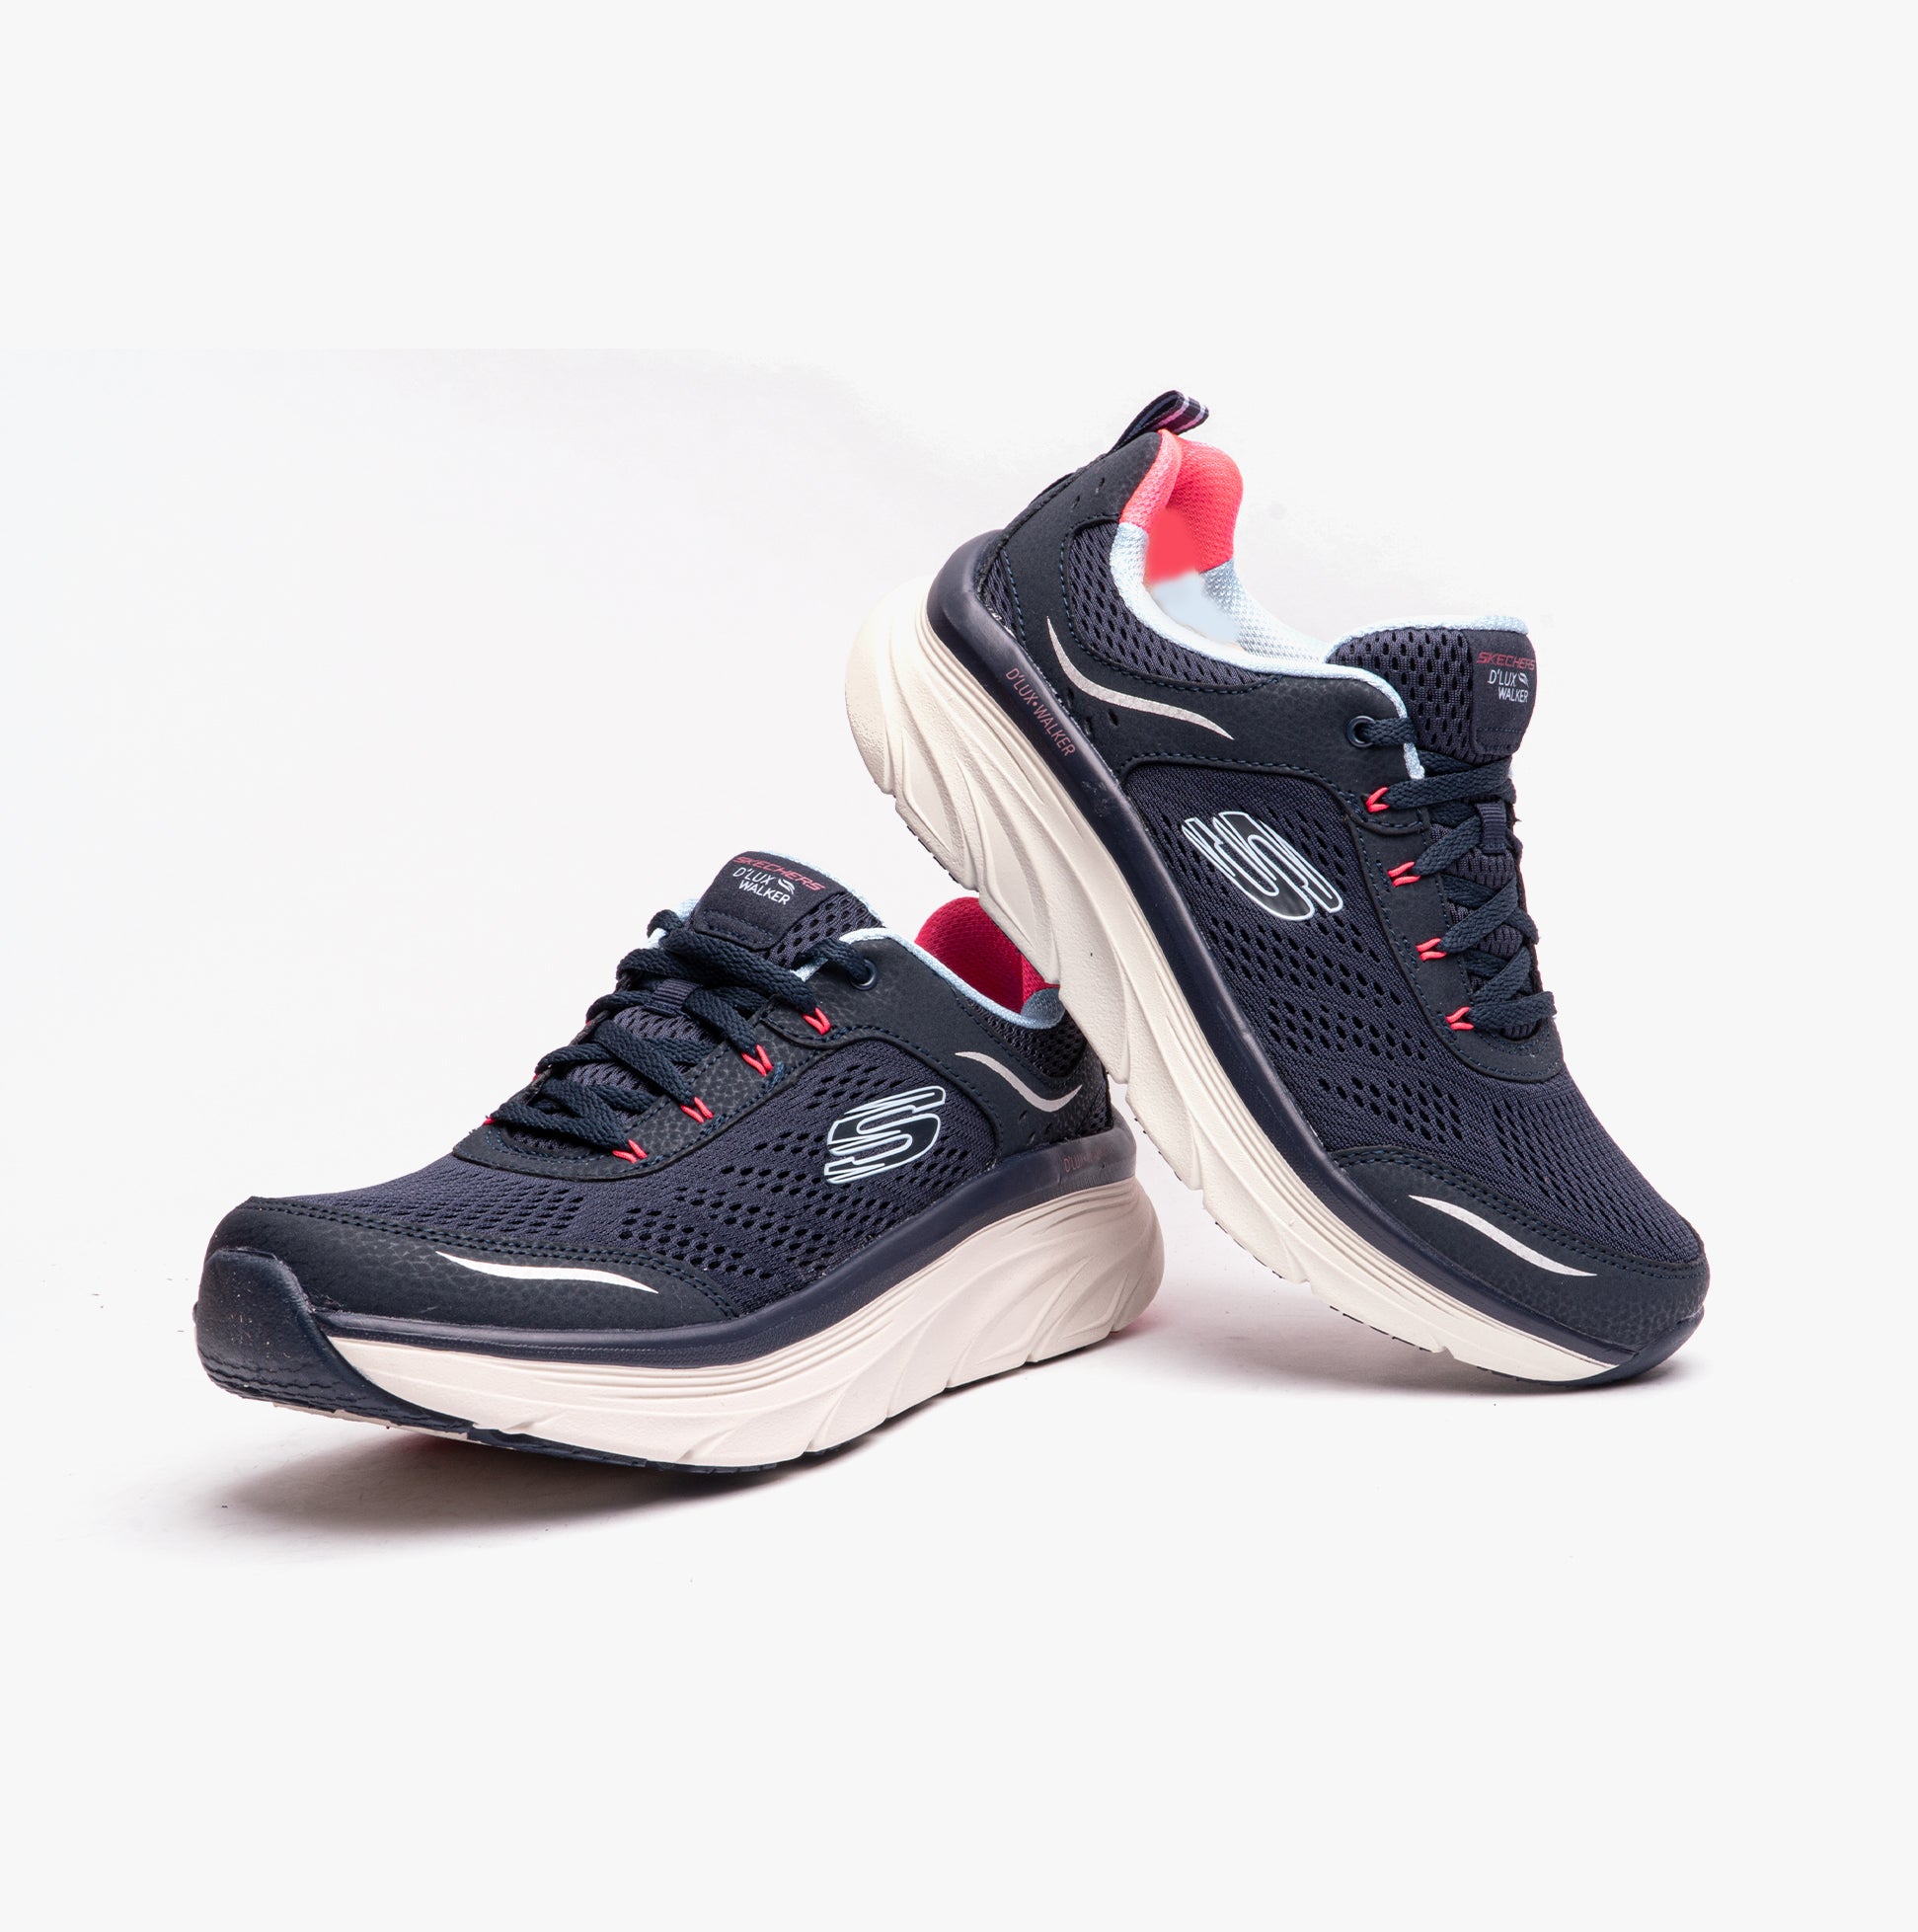 Skechers-[149023-NVCL]-Navy-Coral-3.jpg